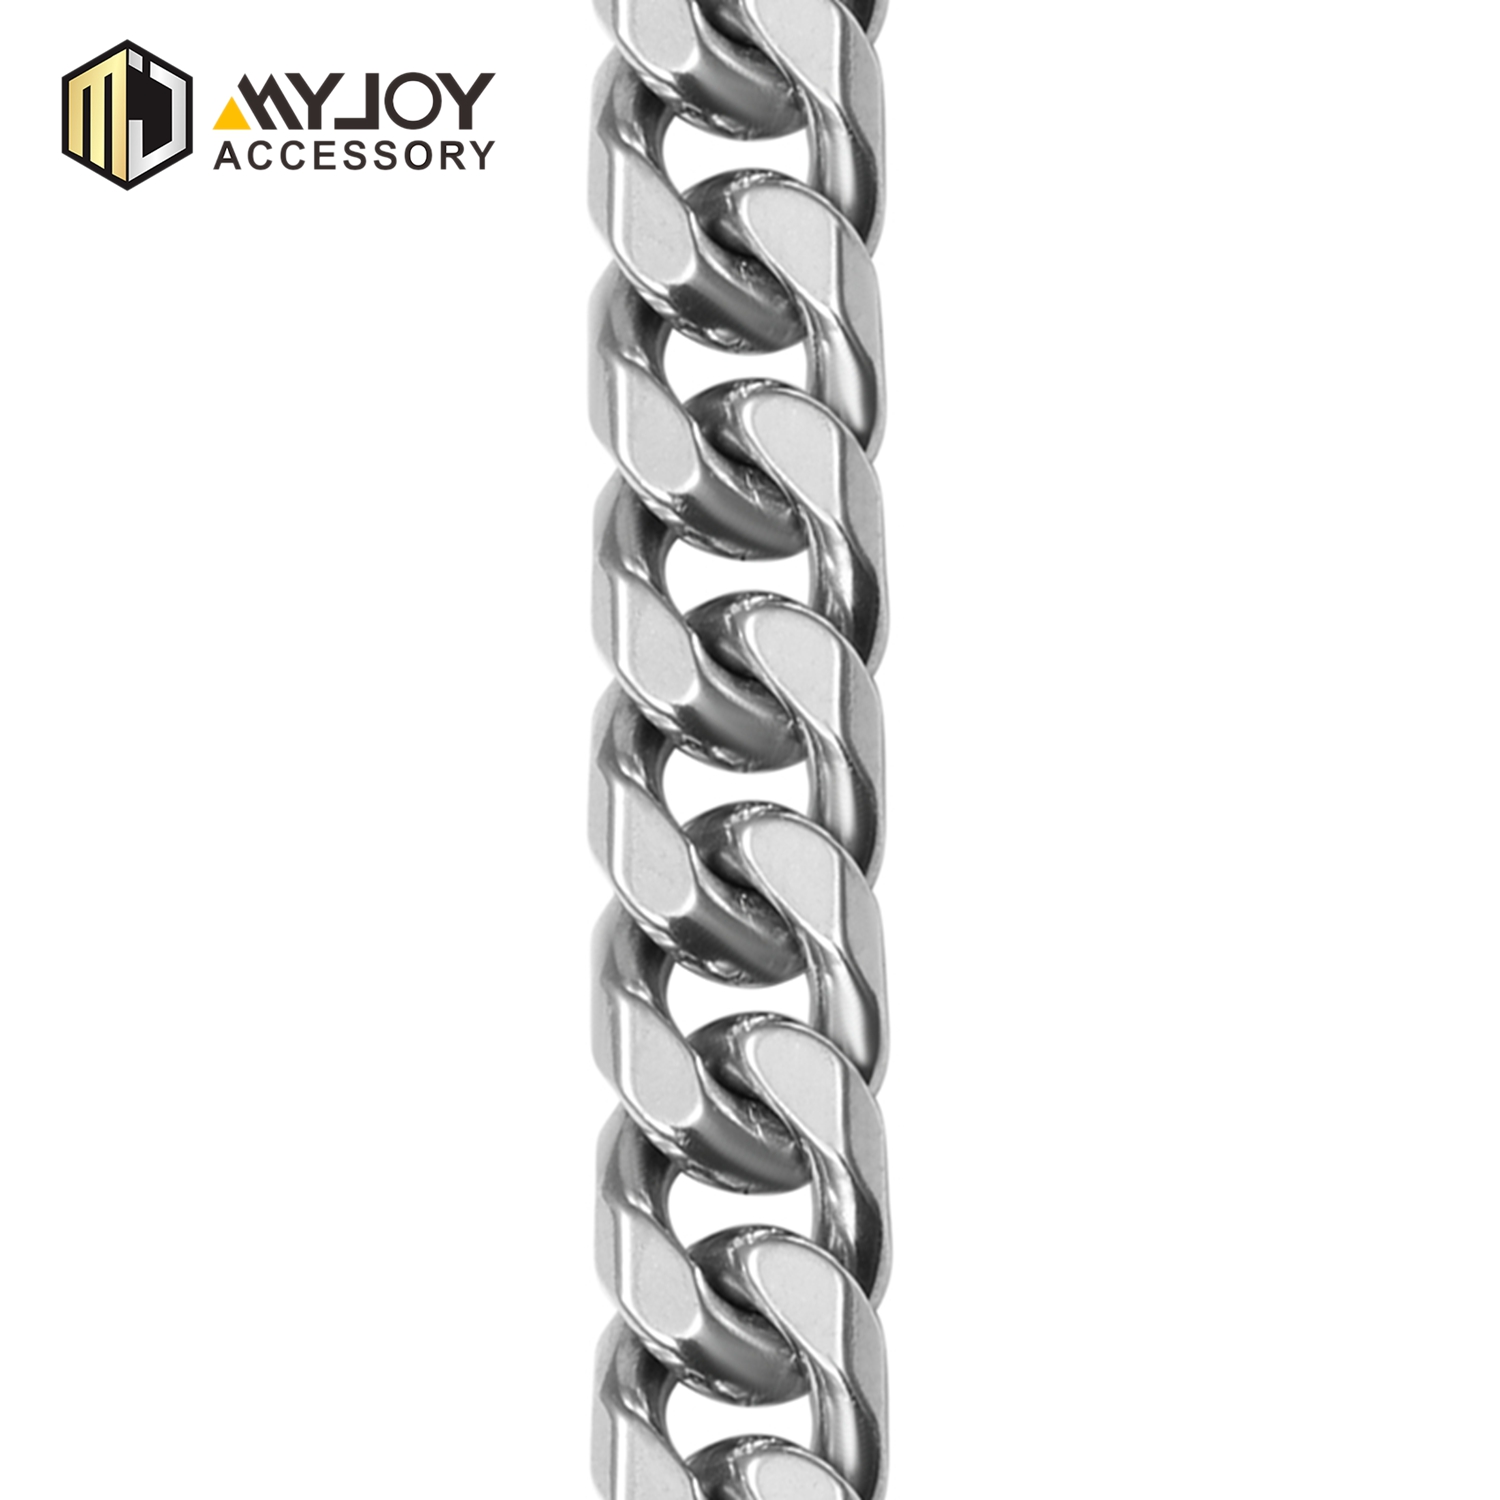 MYJOY cm bag chain for business for purses-1